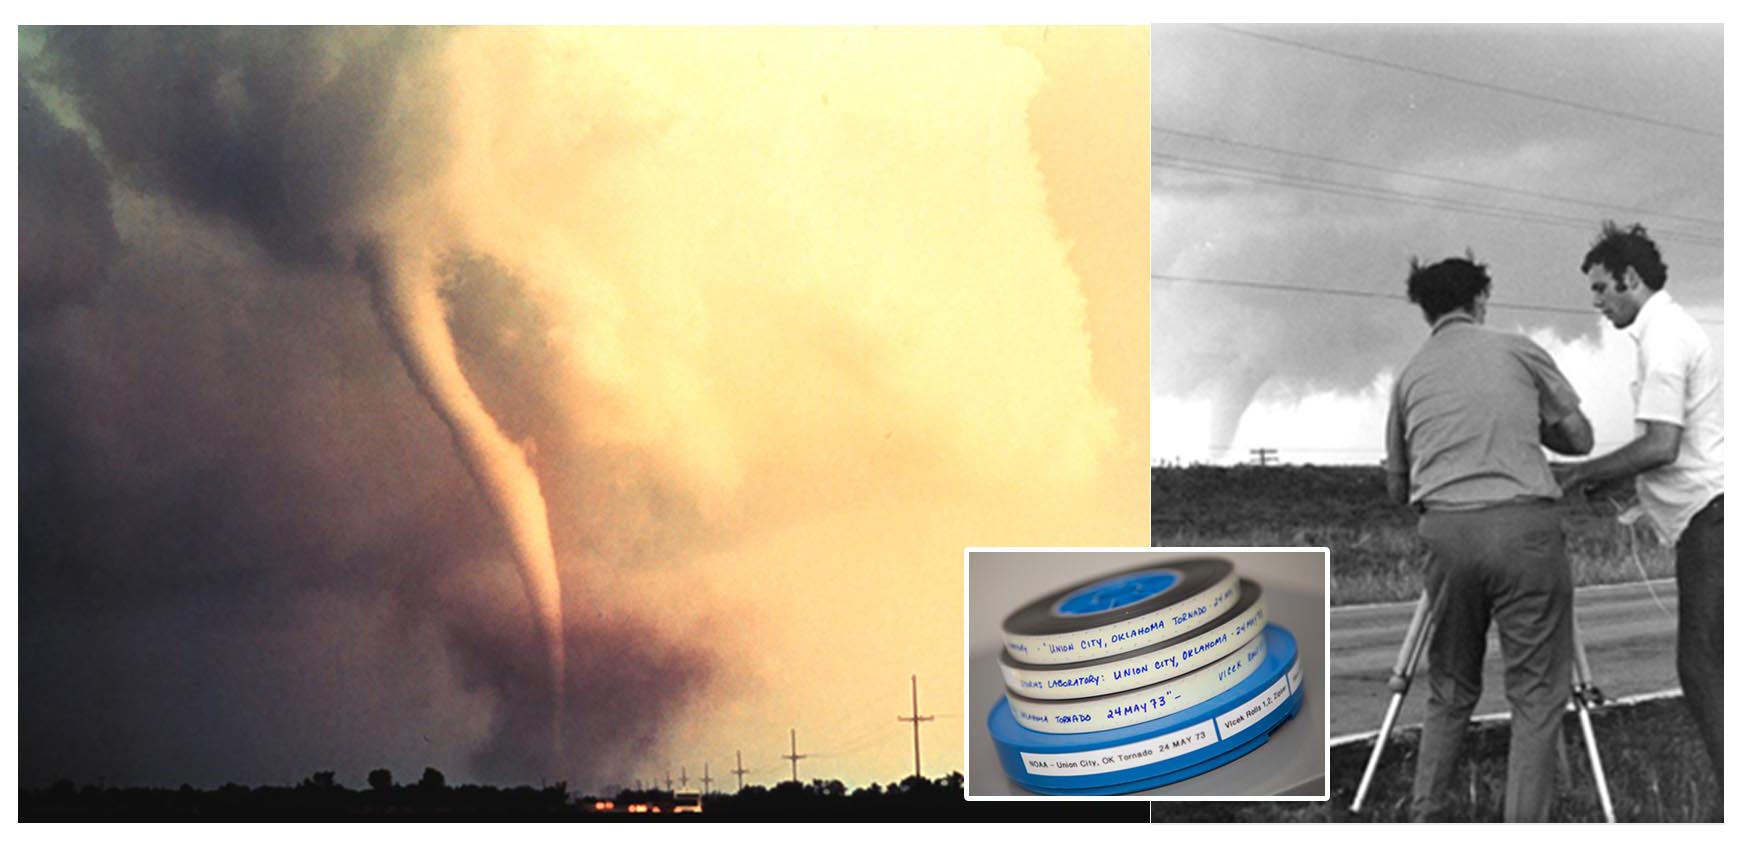 As the devastating tornado tore through the small town of Union City, Okla., on May 24, 1973, no one knew the tremendous impact it would have on the development of weather radar. Researchers from the NOAA National Severe Storms Laboratory now look back on that day as a significant event in the history of severe weather research and forecasting.